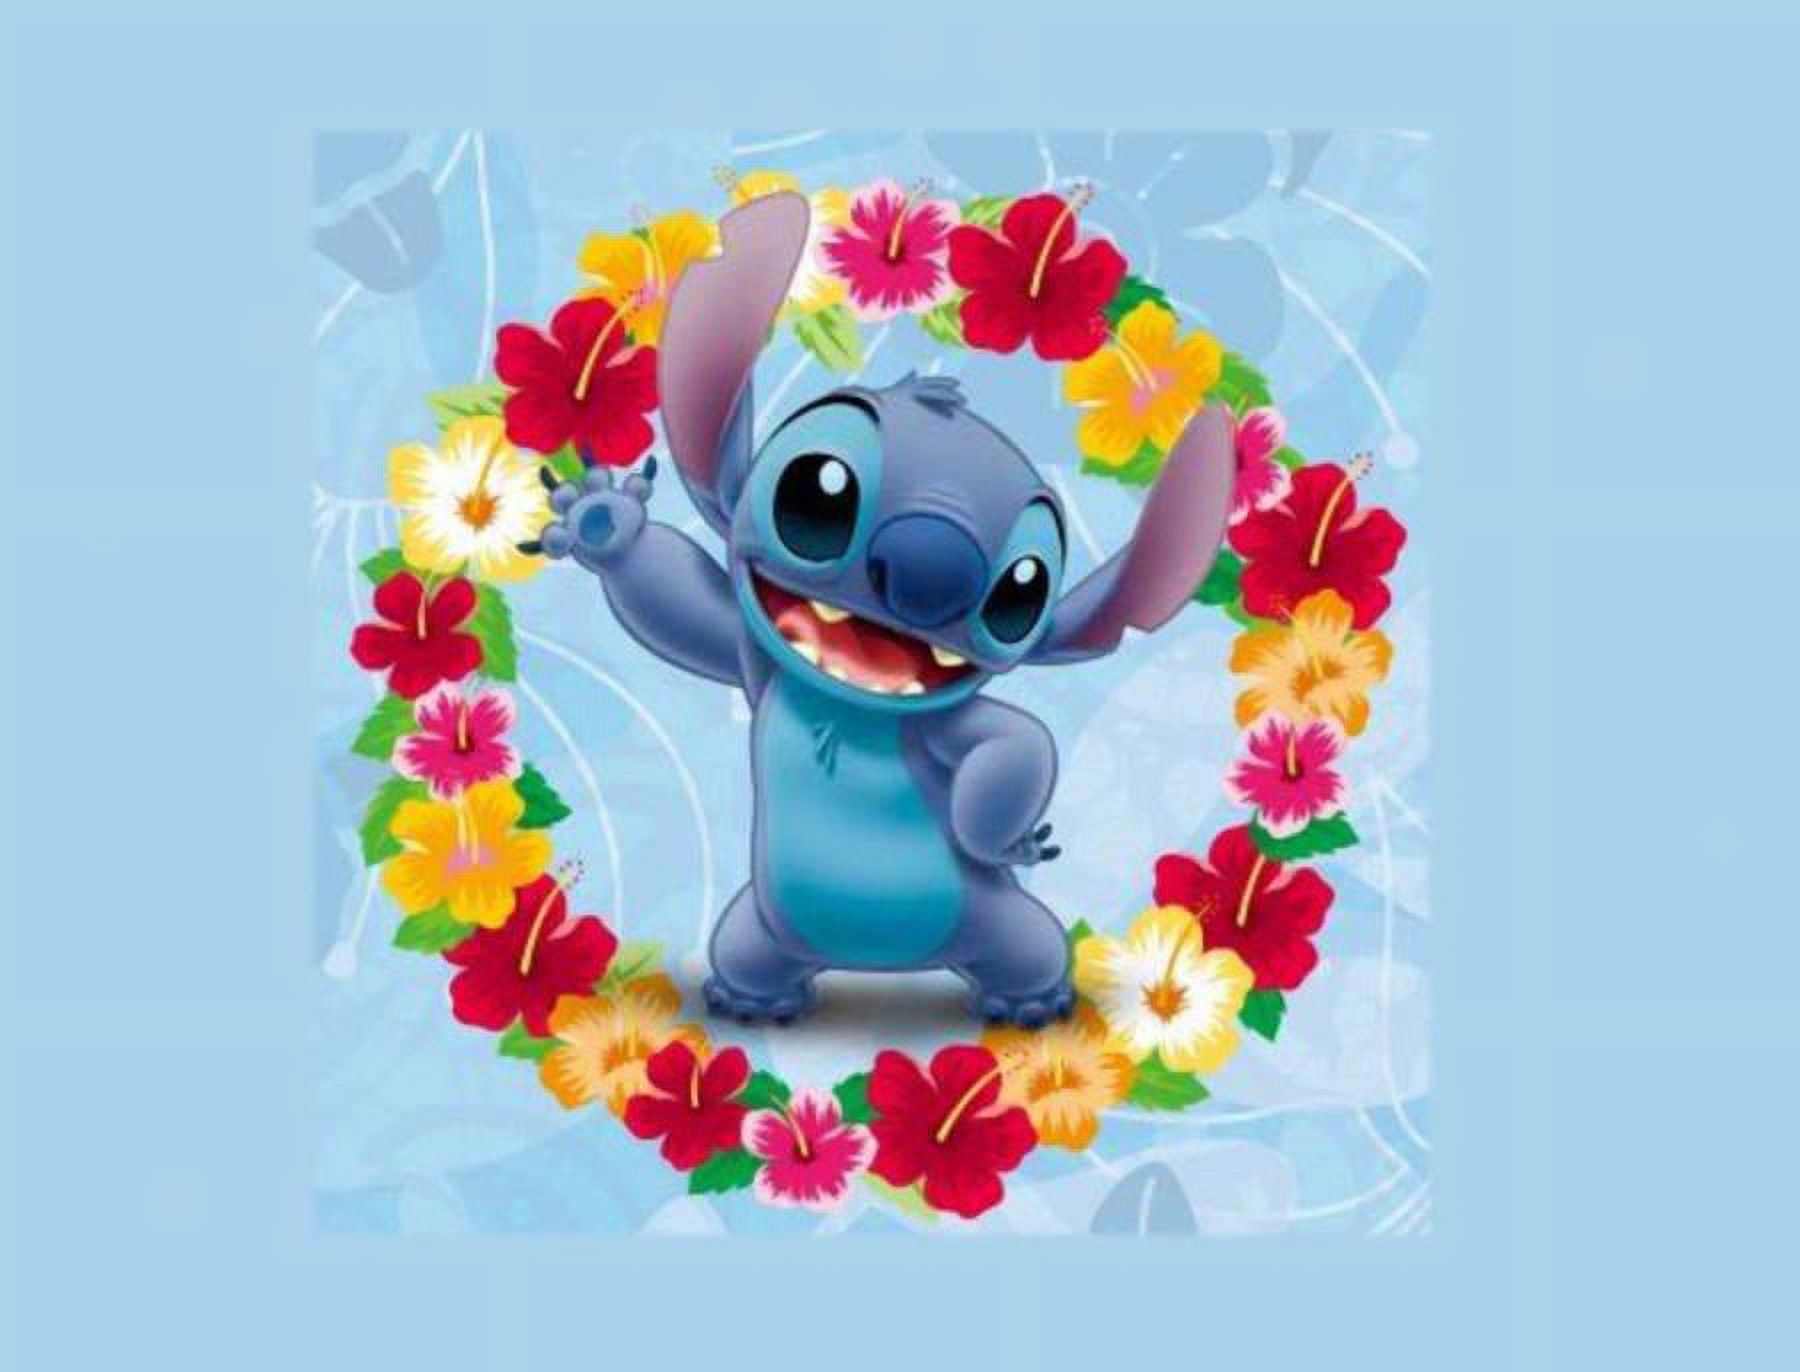 Stitch with Flowers from Lilo and Stitch Edible Cake Topper Image  ABPID51026 